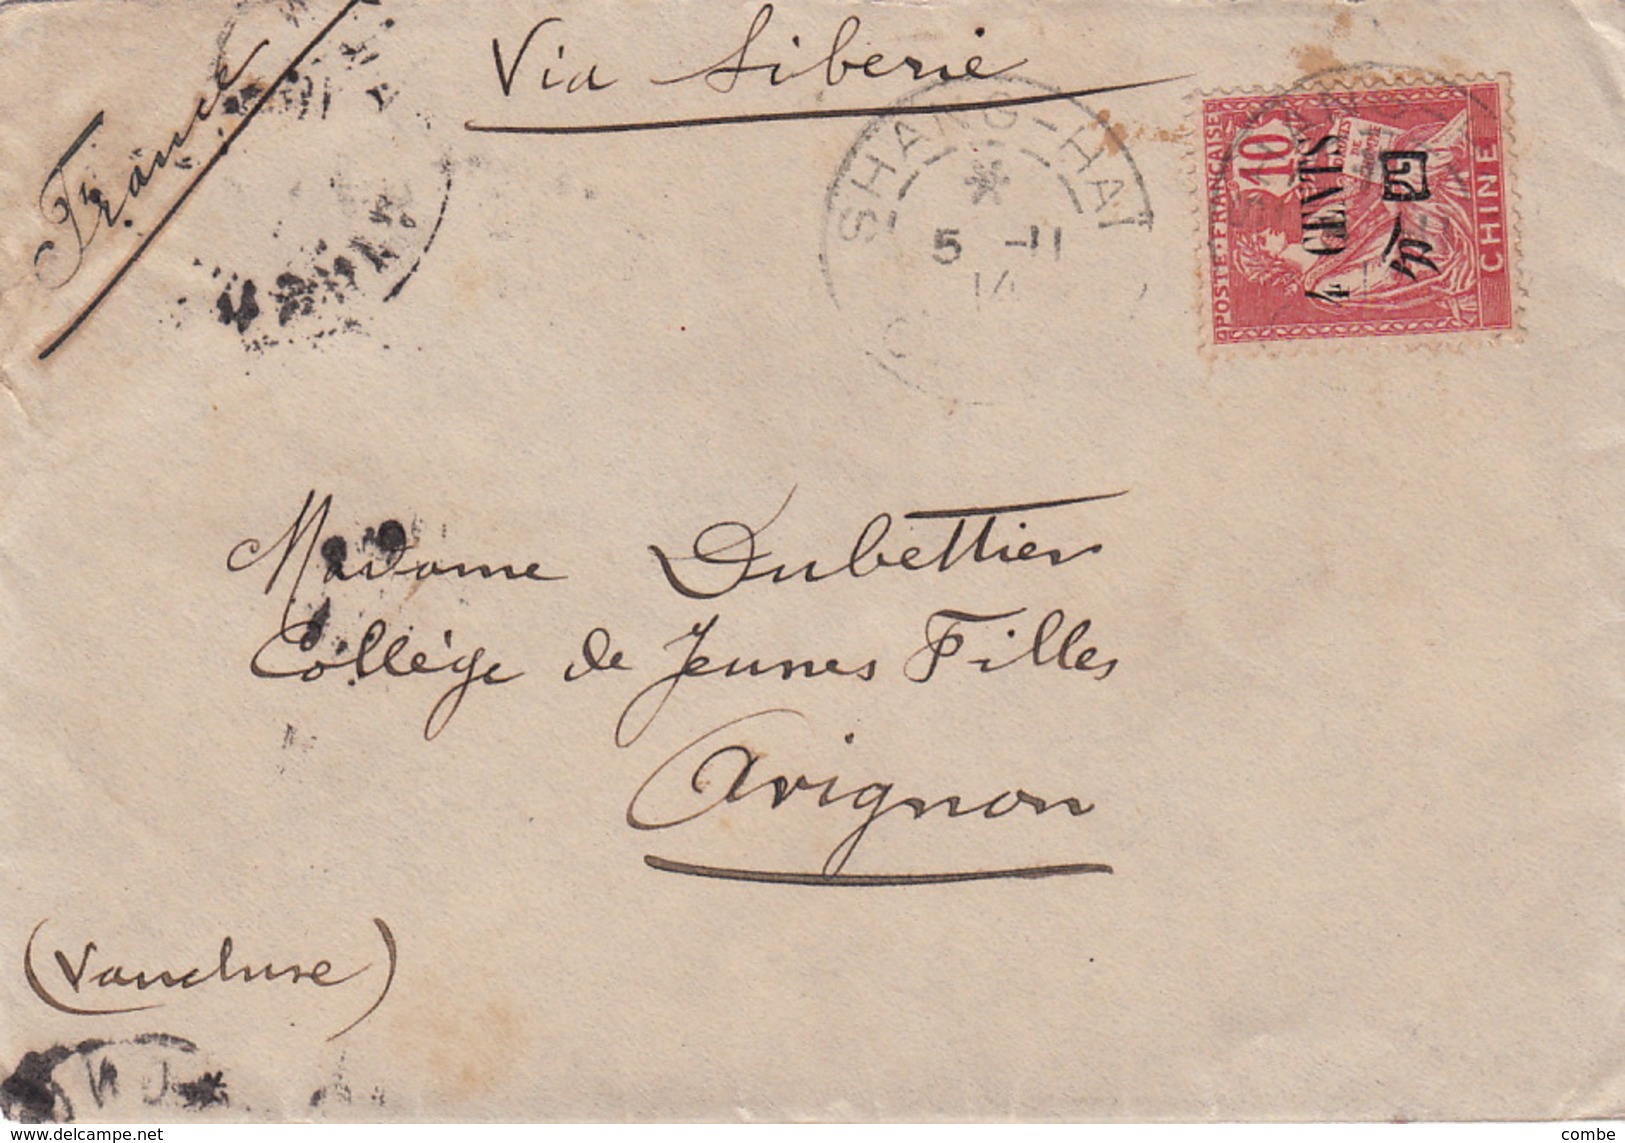 LETTRE CHINE.   COVER CHINA.    5 11 14.   SHANG-HAI TO AVIGNON FRANCE VIA SIBERIE.  ENVELOPPE DES MESSAGERIES MARITIMES - Covers & Documents